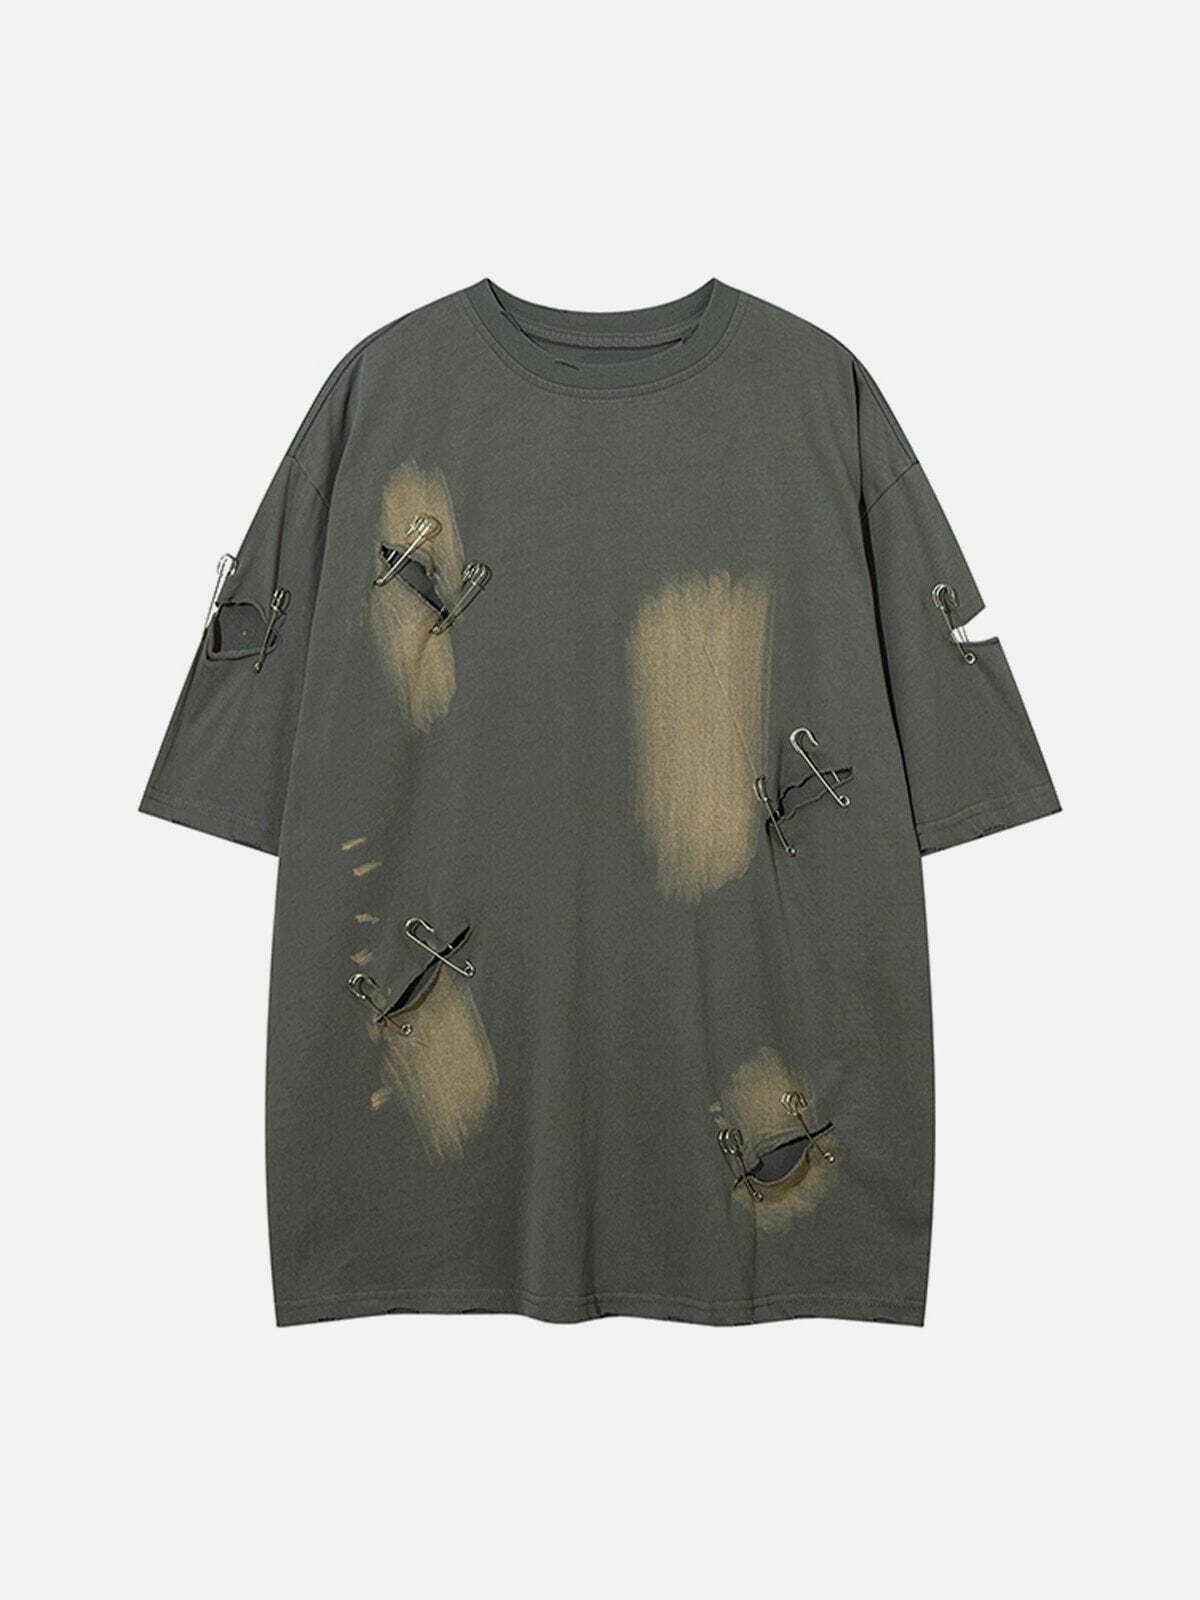 washed holes distressed tee edgy streetwear essential 1972